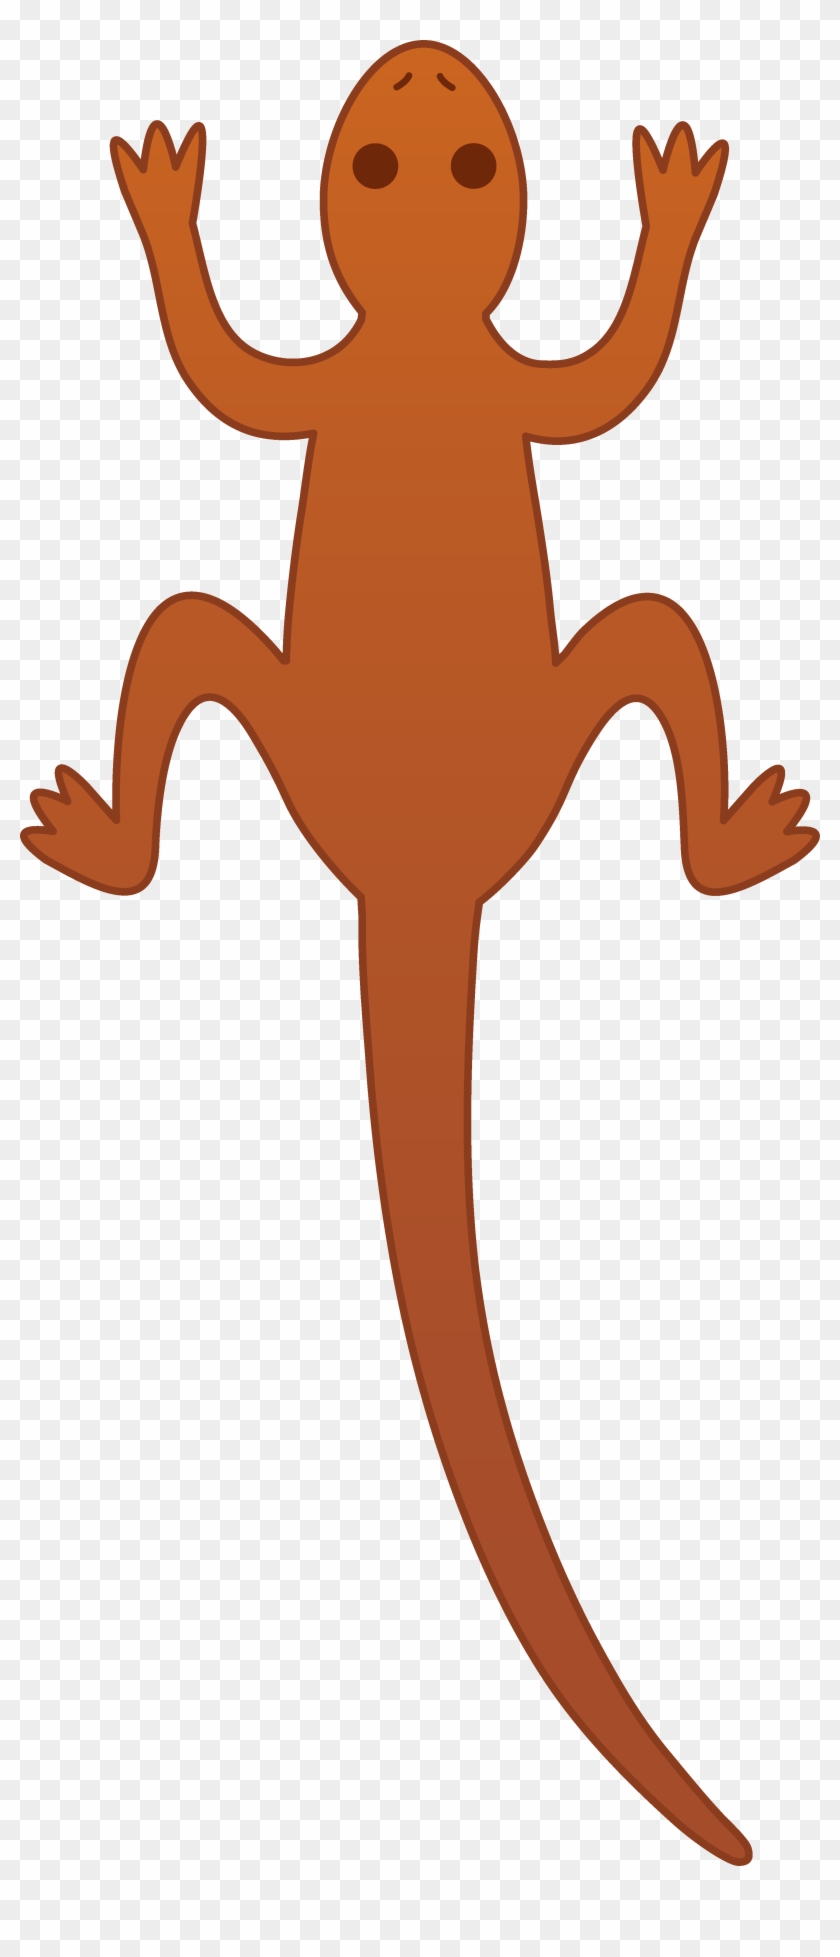 Svg Transparent Library Monitor Lizard Colour Free - Clipart Lizard - Png Download #364849